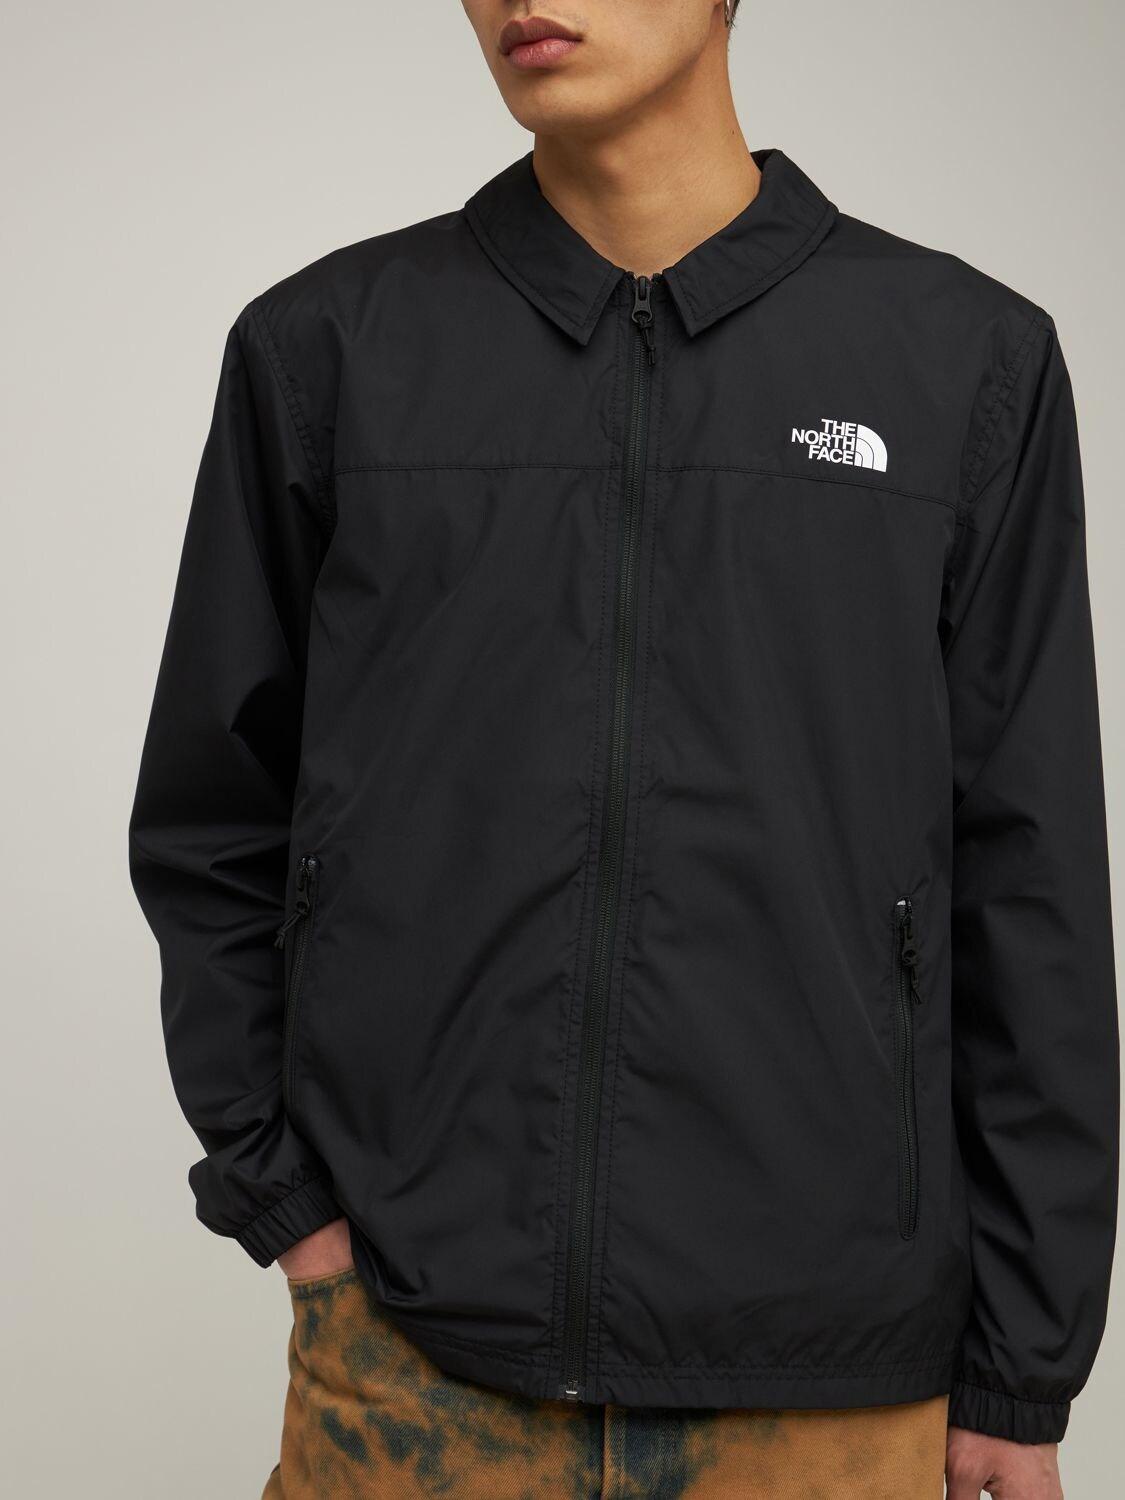 The North Face Cyclone Coach Jacket in Black for Men | Lyst